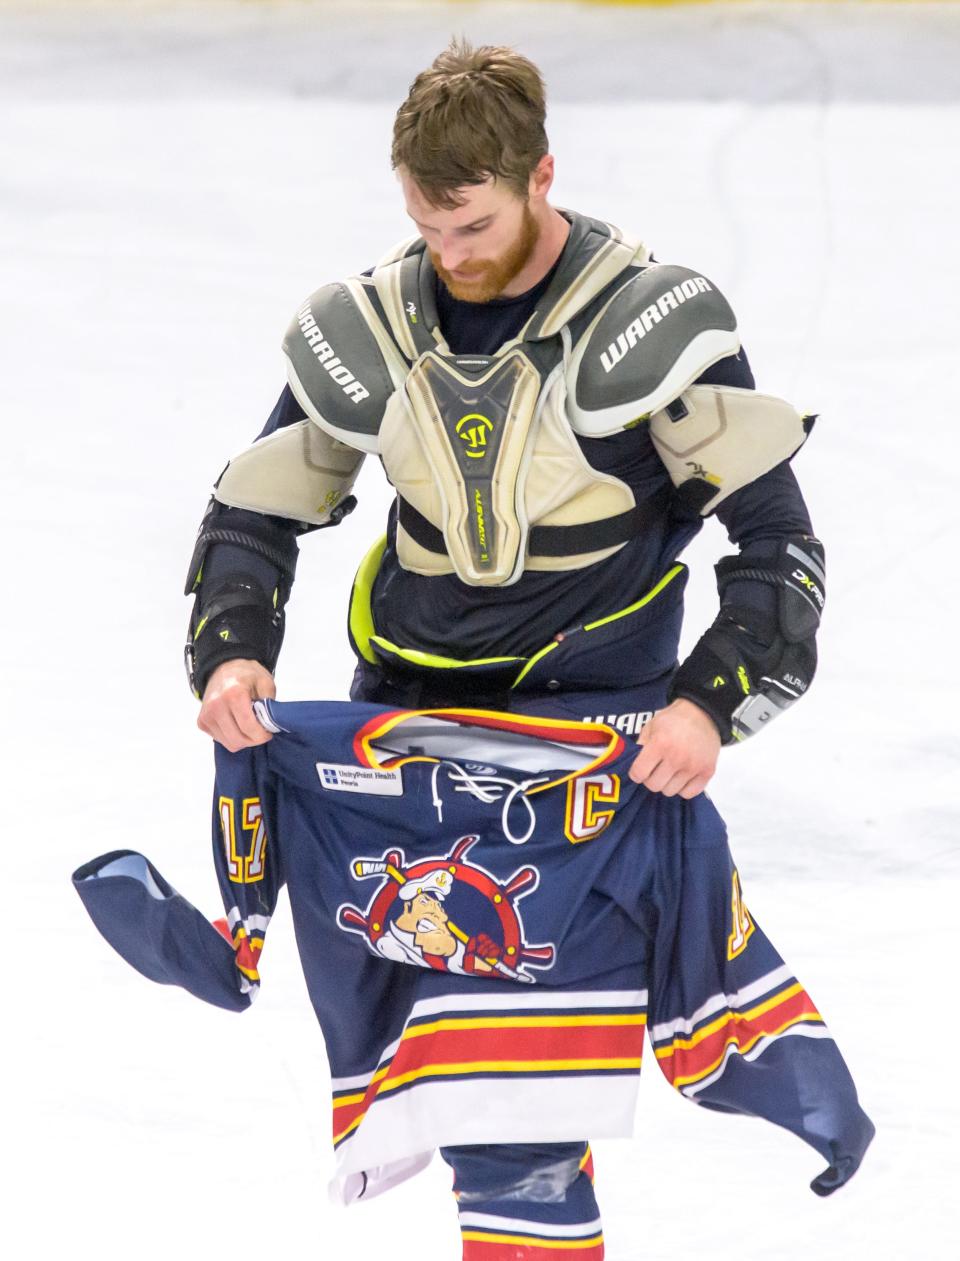 Retiring Peoria captain Alec Hagaman removes his jersey to lay it on center-ice after Game 3 of the SPHL semifinals Sunday, April 23, 2023 at Carver Arena. The Rivermen fell 5-3 to the Roanoke Rail Yard Dawgs.